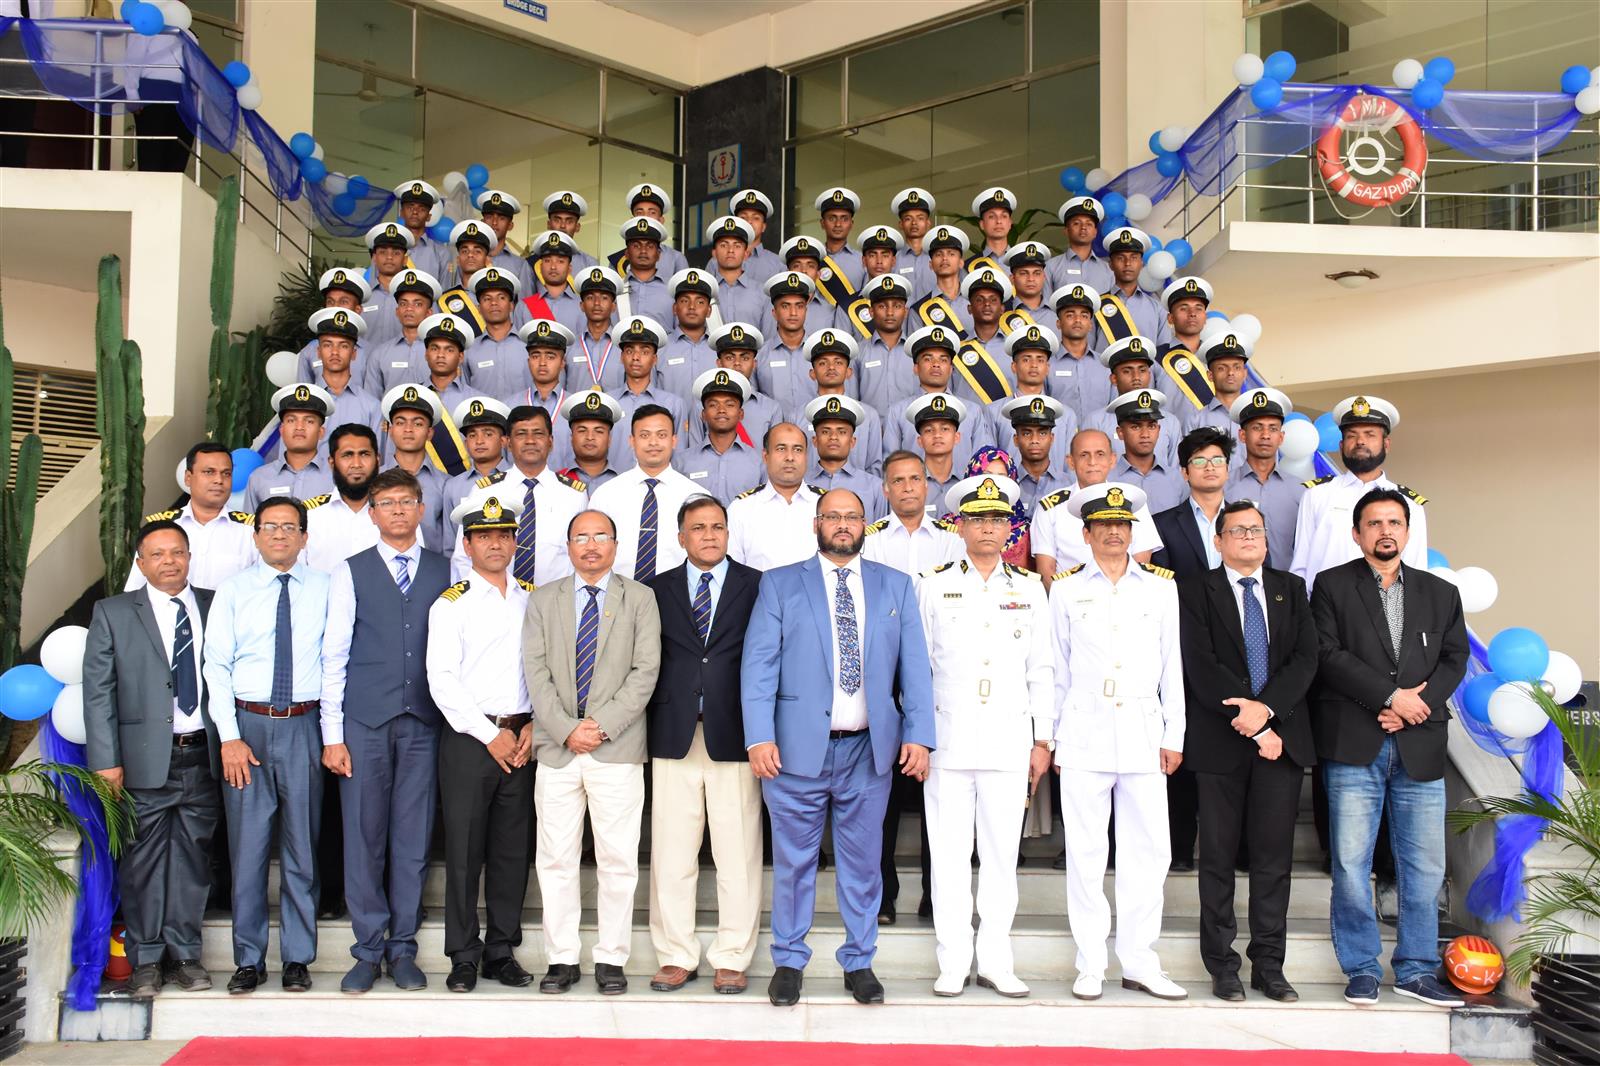 Passing Out Ceremony of IMA 5th Batch Ratings